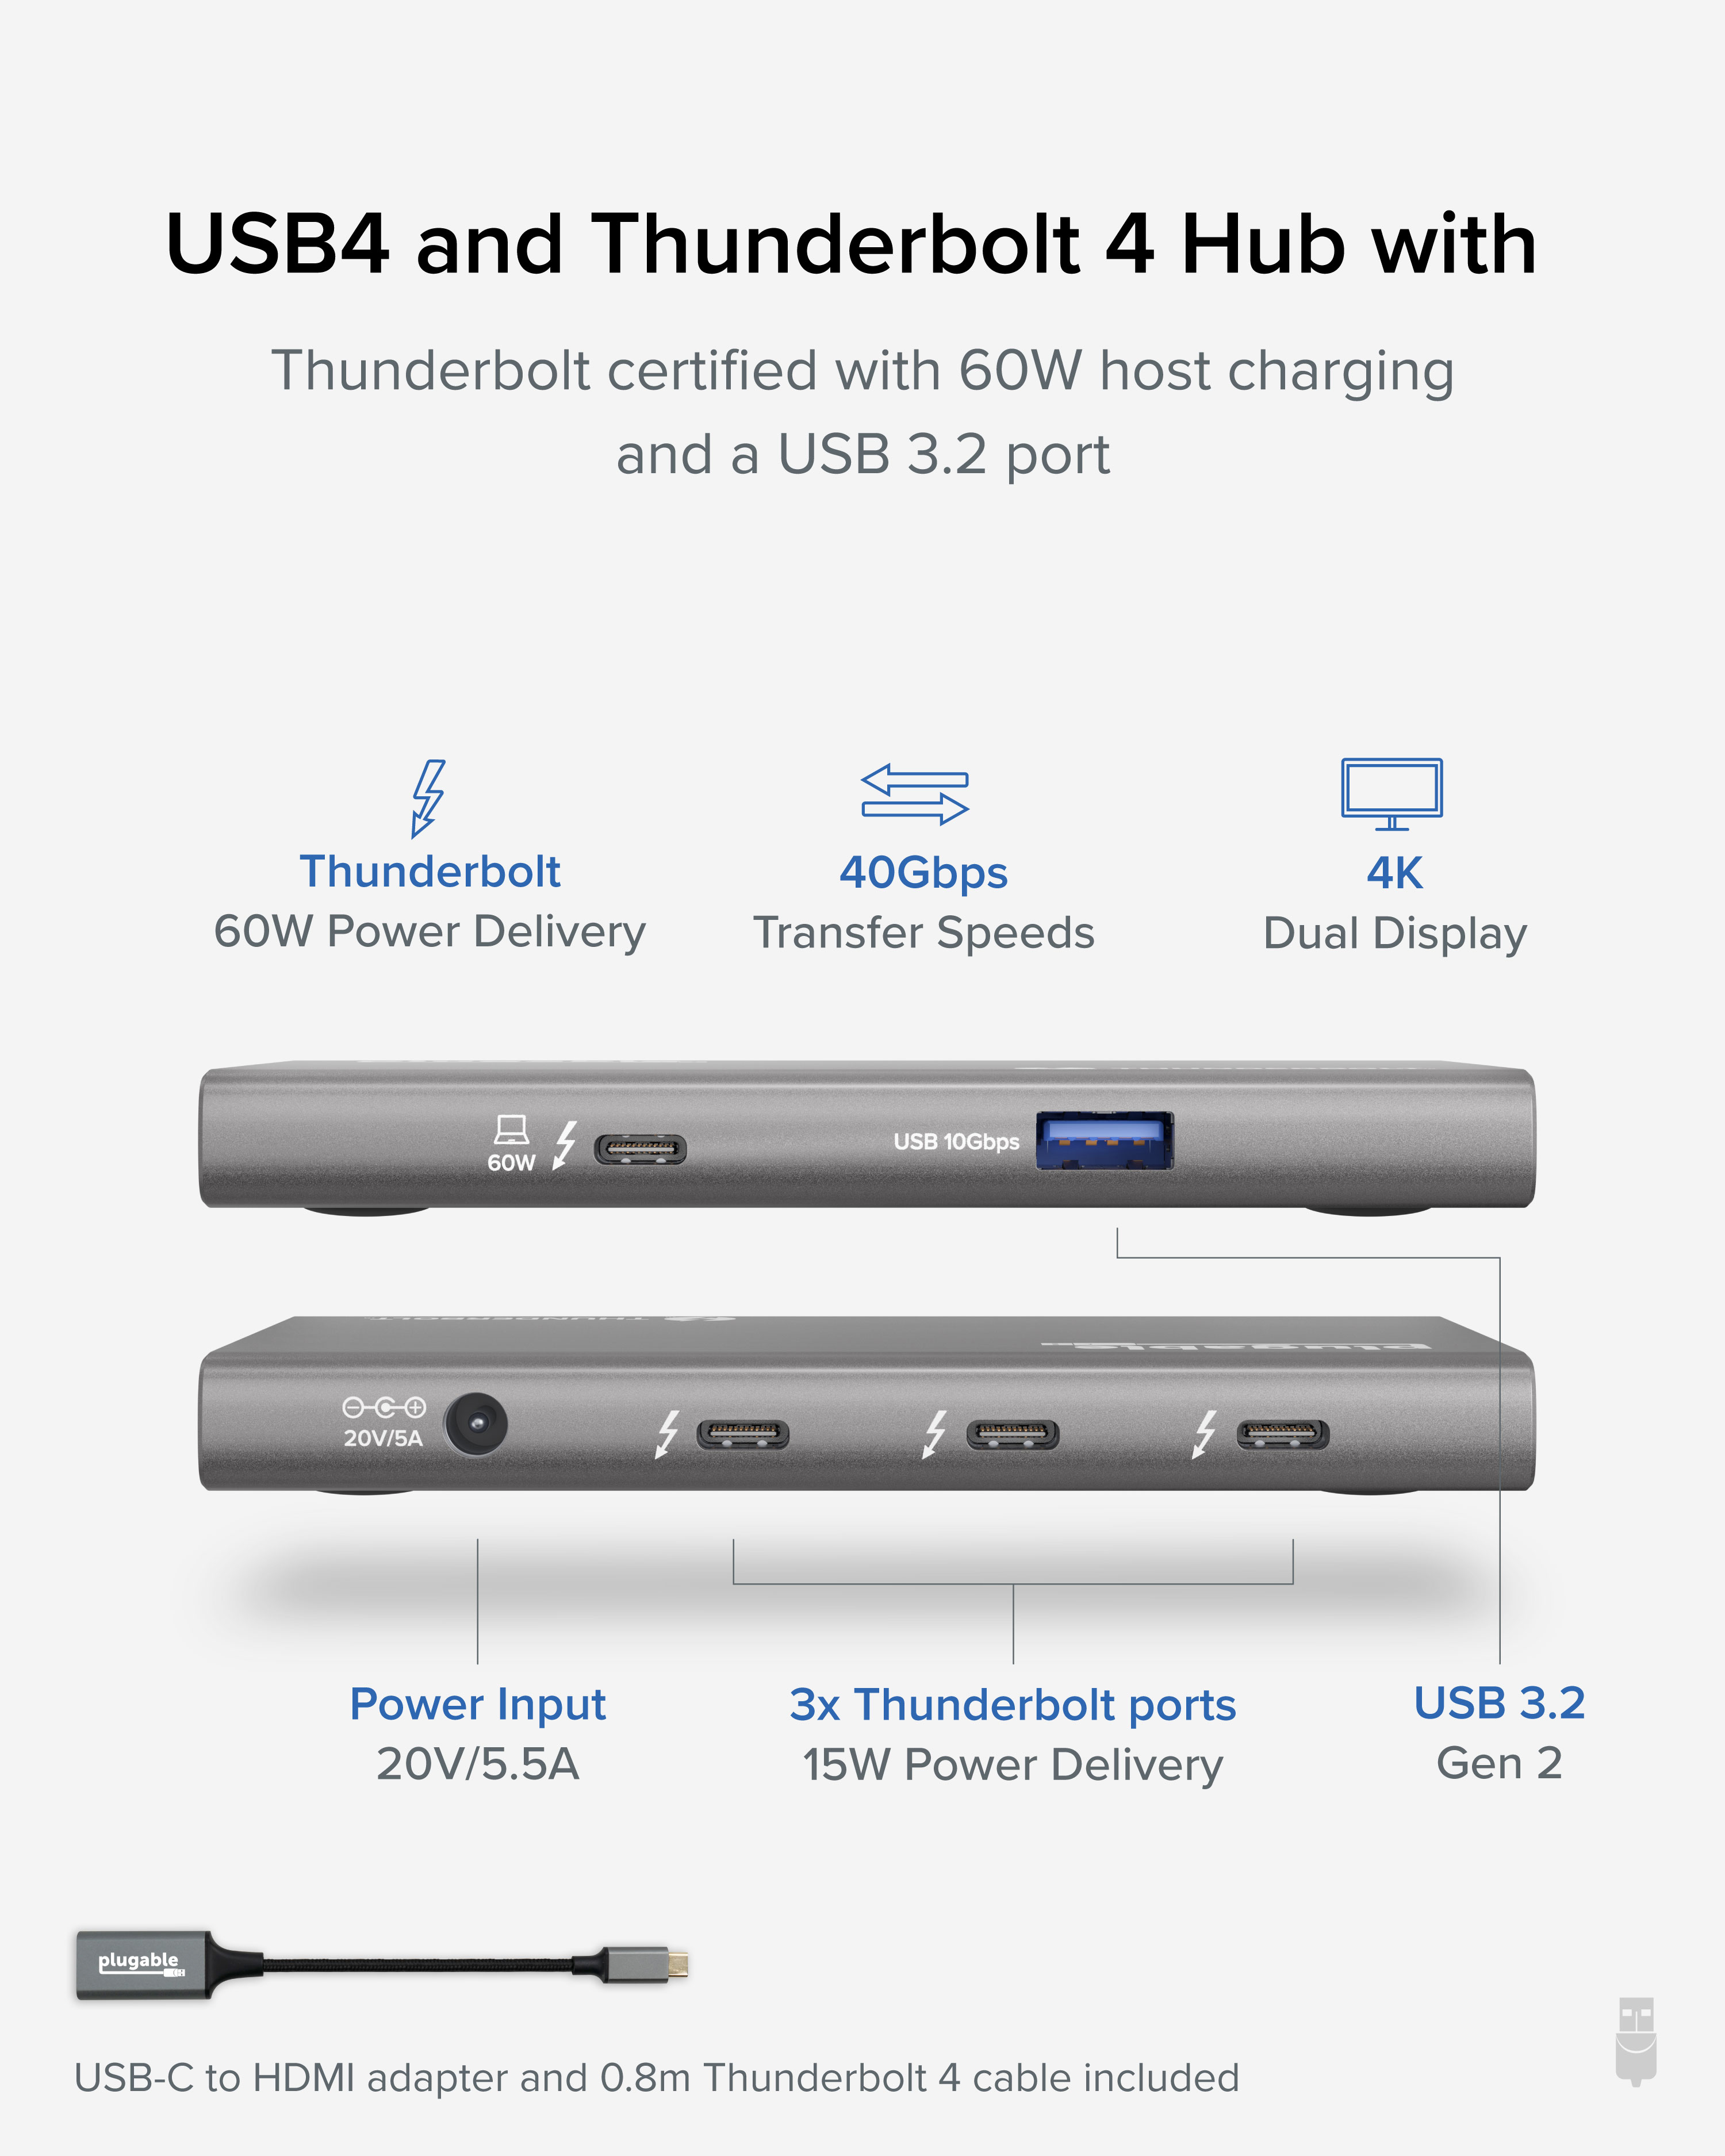 Plugable 5-in-1 Thunderbolt 4 Hub with 60W Charging, Single 8K or Dual 4K Display, Compatible with Thunderbolt USB4 Macs and Thunderbolt 4 / USB4 Windows (1x USB-C to HDMI Adapter) - image 3 of 7